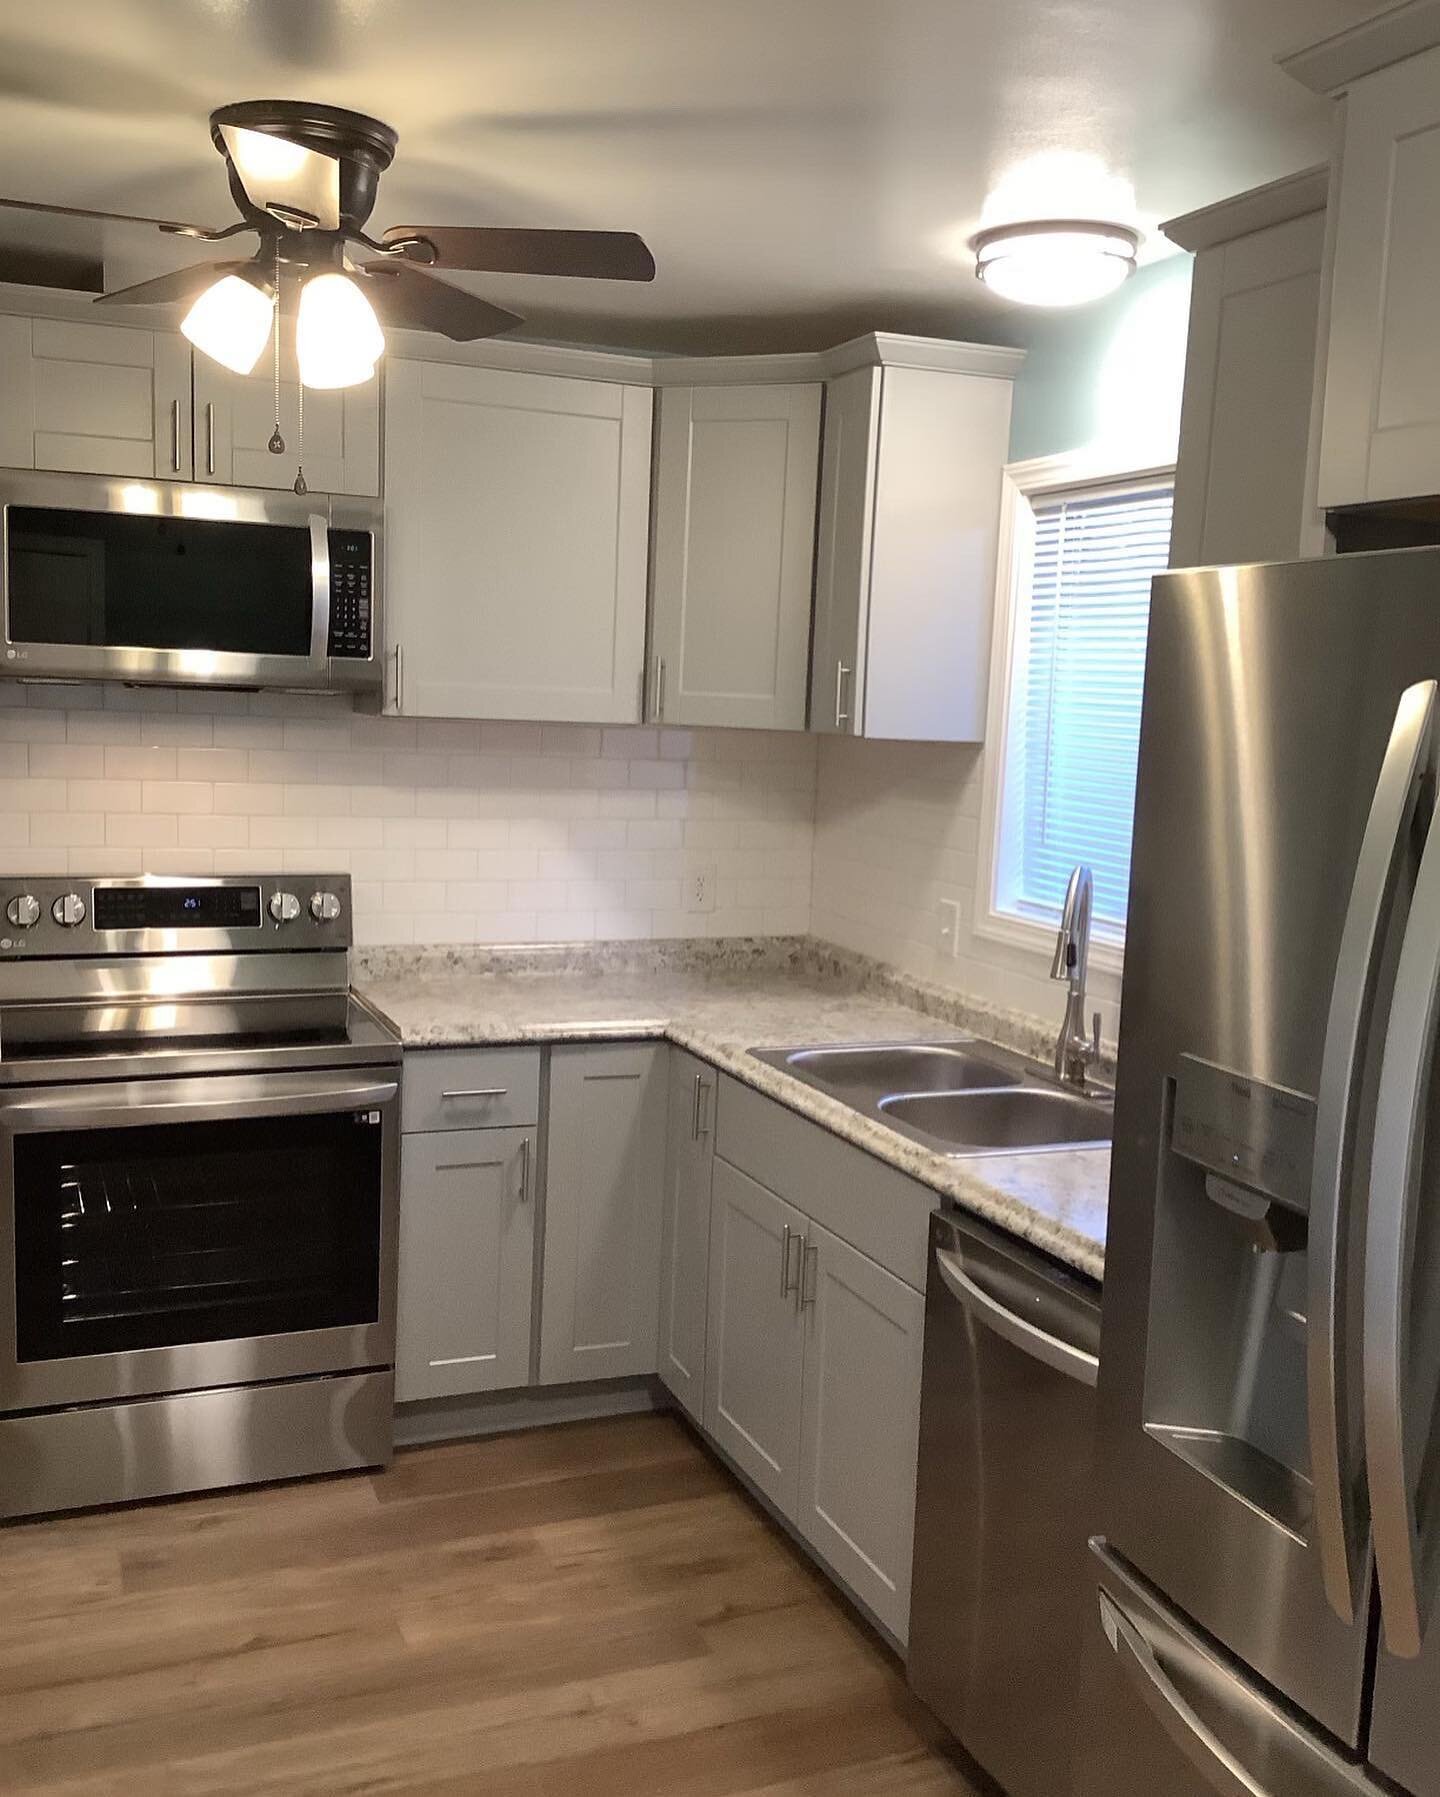 We just finished a full kitchen remodel with @johnsonconstructionnwllc for one of our homeowners. Swipe through the pics to see how this talented Black-owned construction company transformed this family&rsquo;s kitchen!

Most of their appliances were